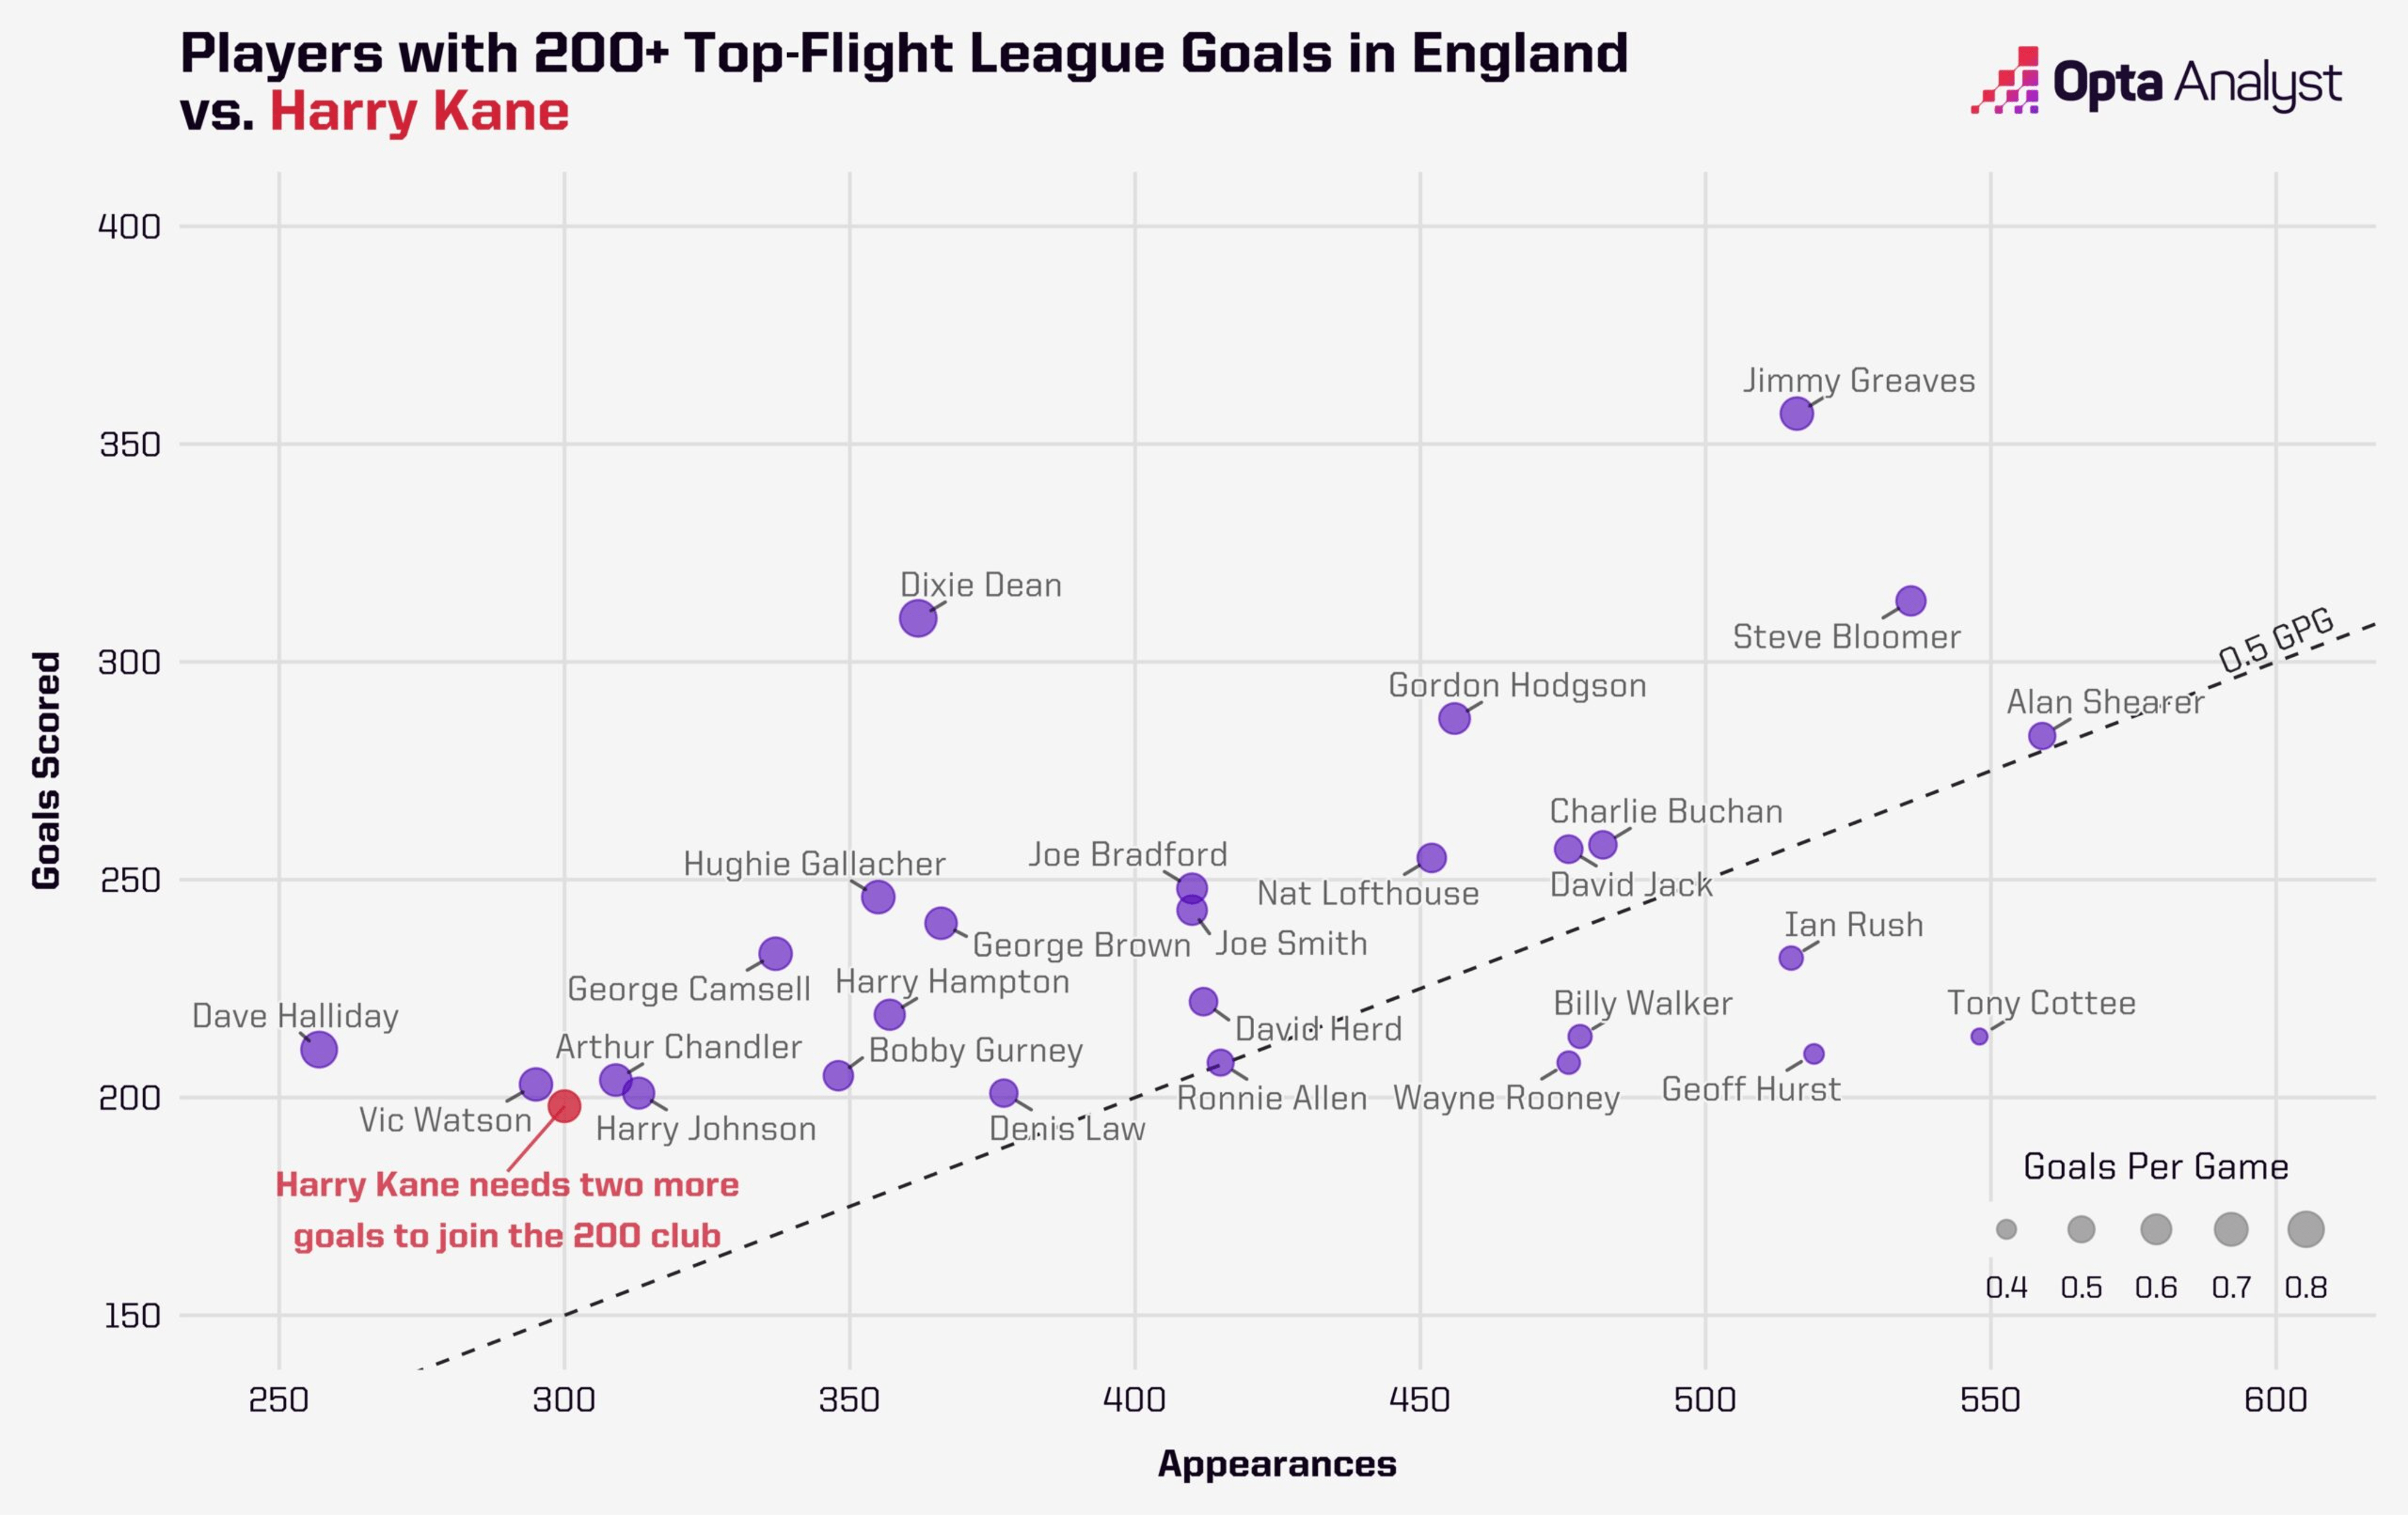 Players with 200 top-flight league goals